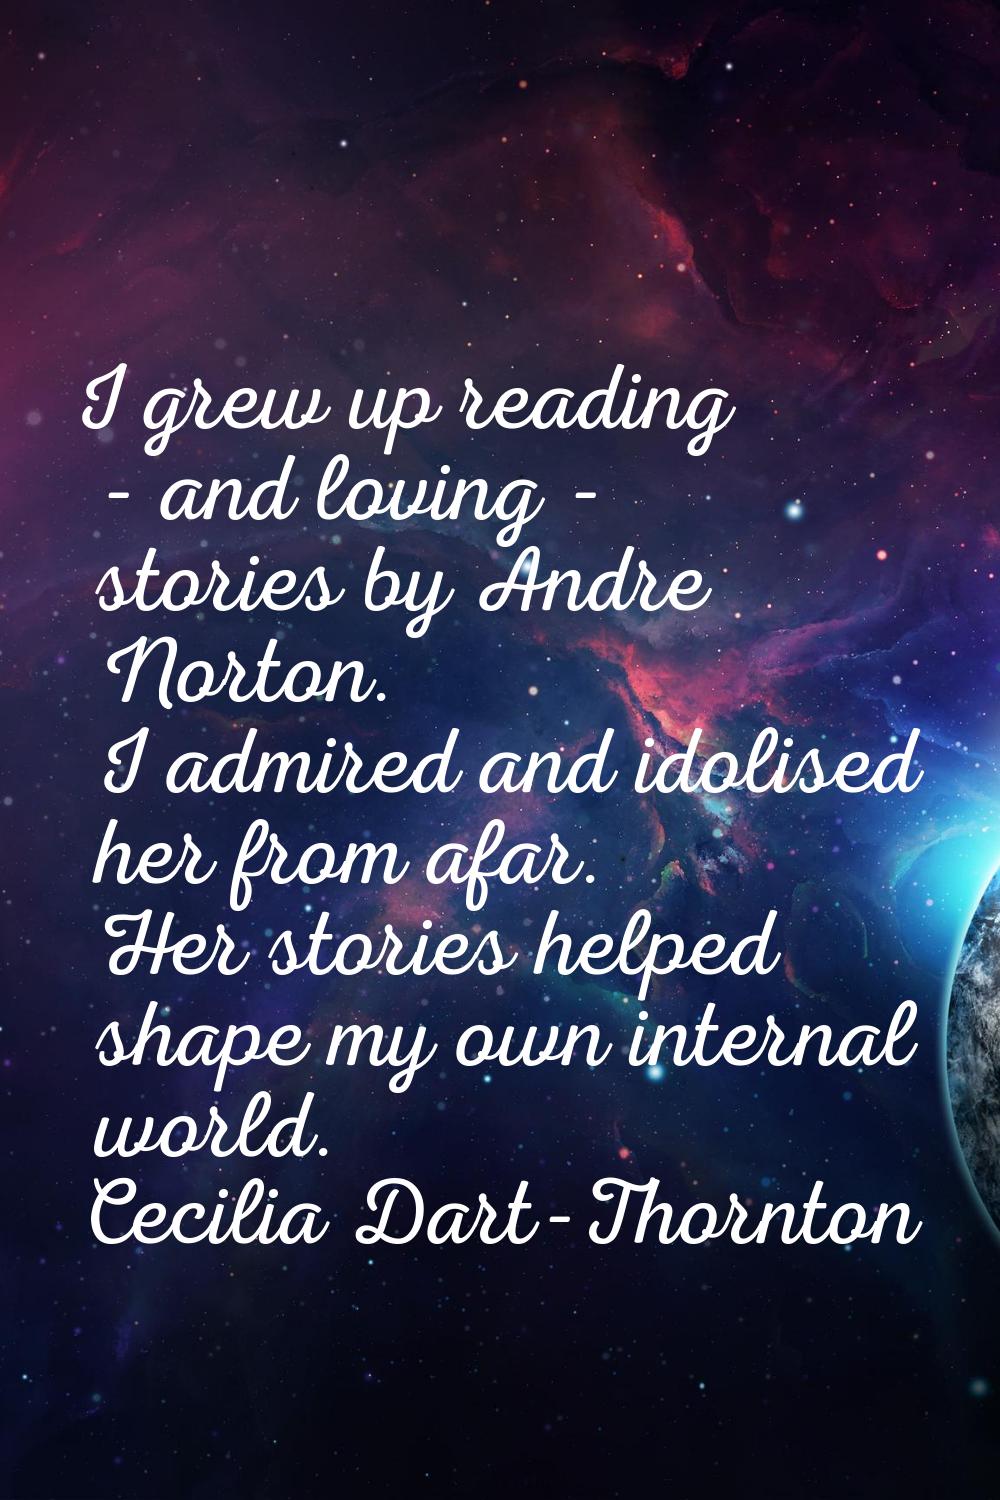 I grew up reading - and loving - stories by Andre Norton. I admired and idolised her from afar. Her